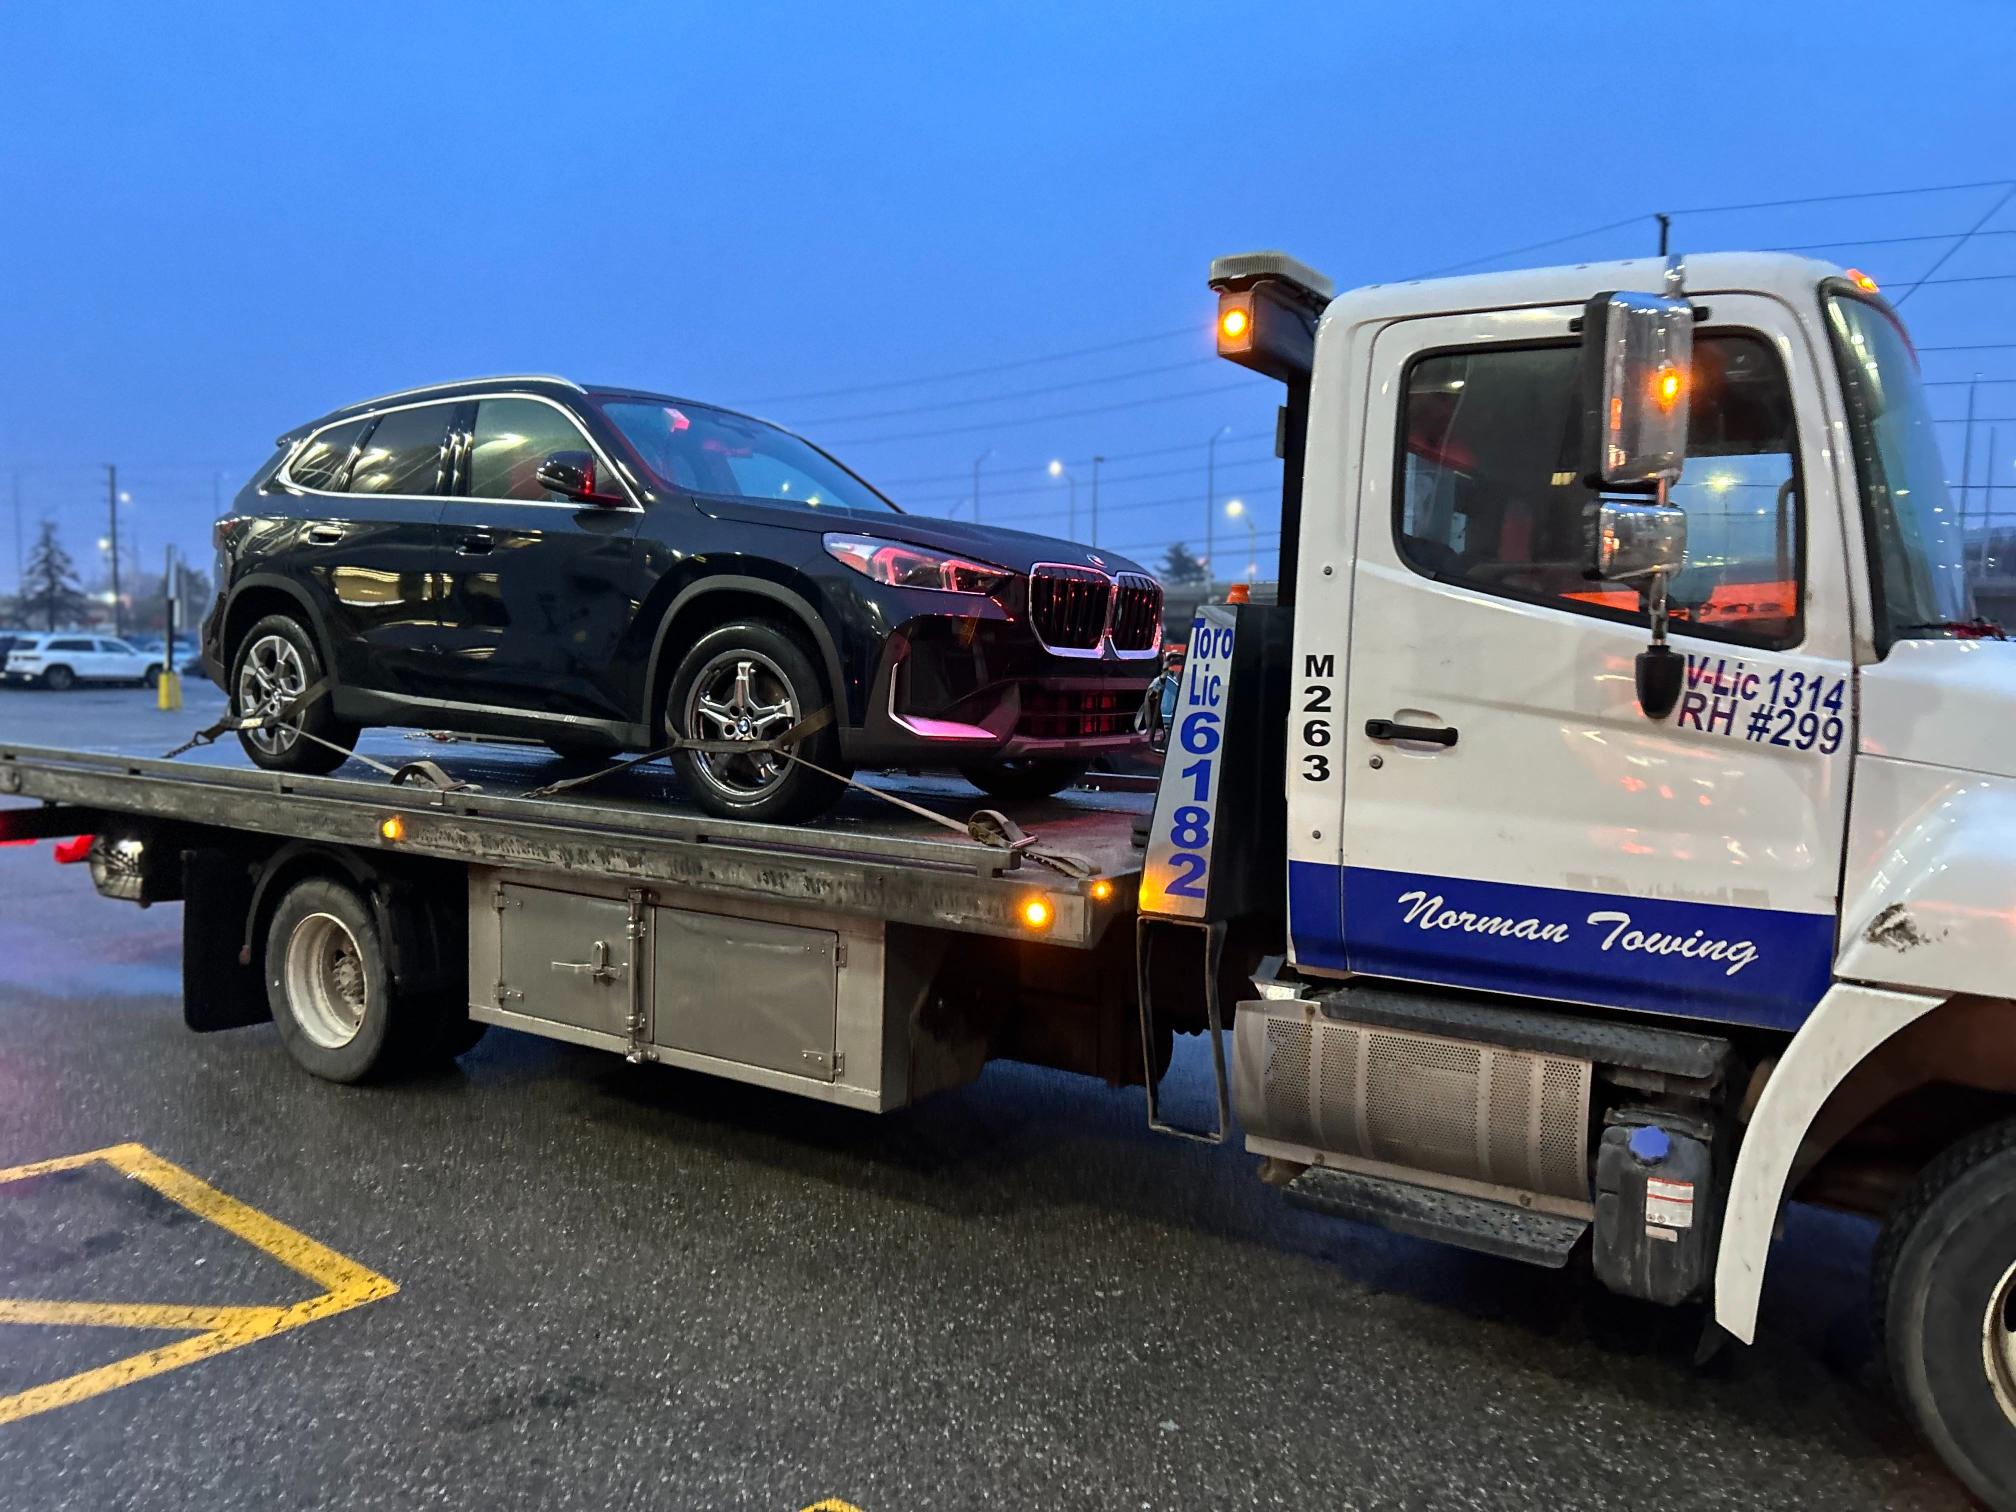 Bmw Luxury Vehicle on Flatbed Tow Truck - Norman Towing